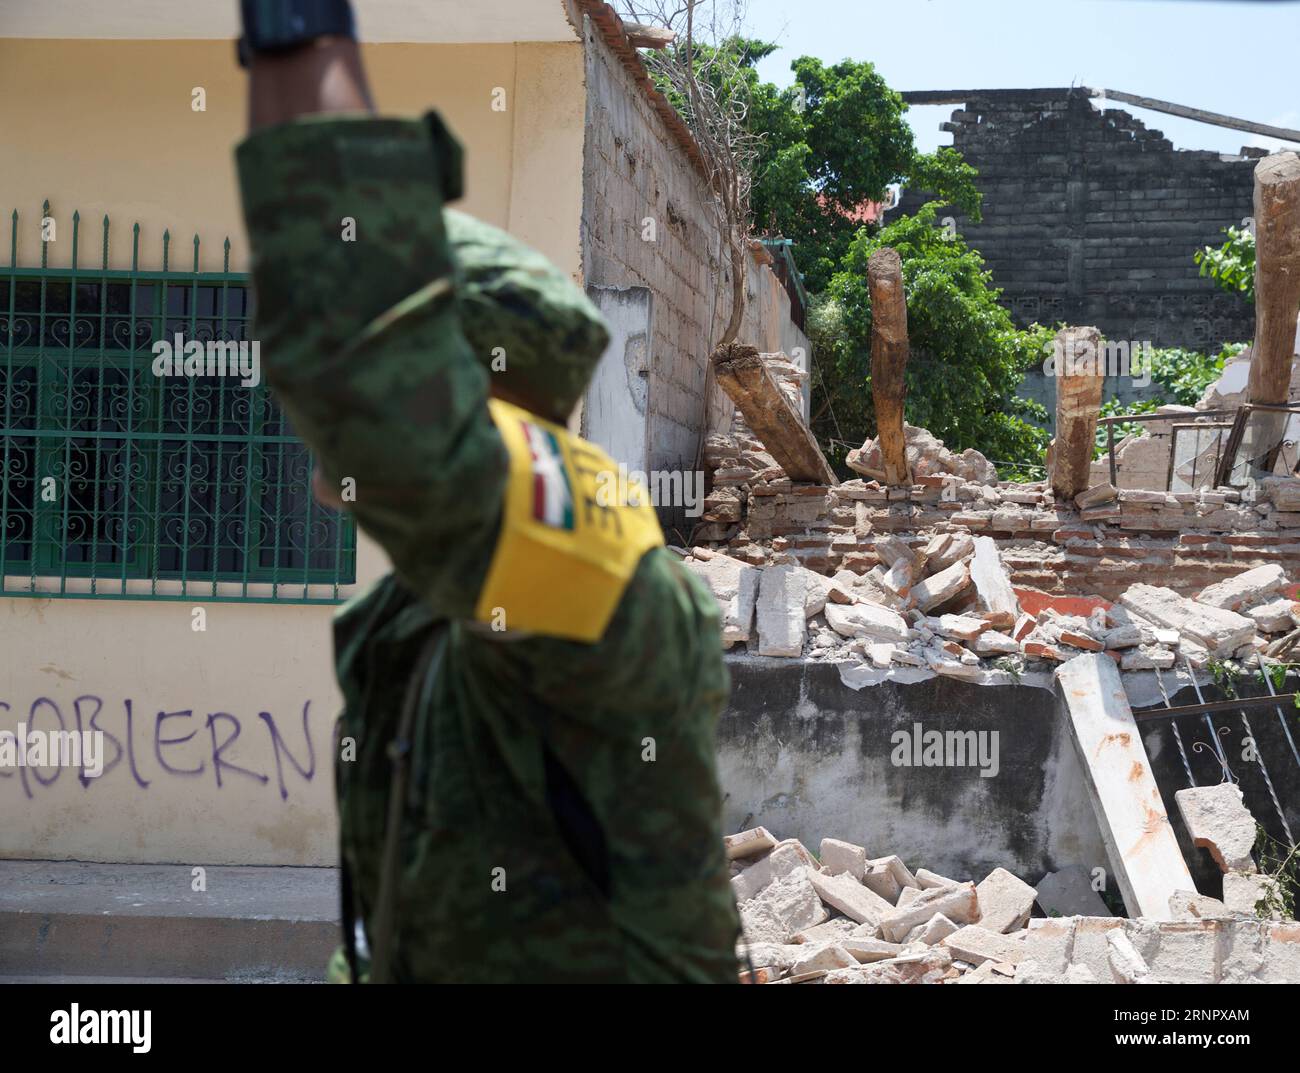 (170910) -- JUCHITAN (MEXICO), Sept. 10, 2017 -- A soldier walks past a damaged house after an earthquake hit in Juchitan, Oaxaca state, Mexico, Sept. 9, 2017. A powerful earthquake measuring 8.2 on the Richter scale struck off Mexico s southern coast late Thursday night, killing 90 people. ) MEXICO-OAXACA-JUCHITAN-EARTHQUAKE DanxHang PUBLICATIONxNOTxINxCHN Stock Photo